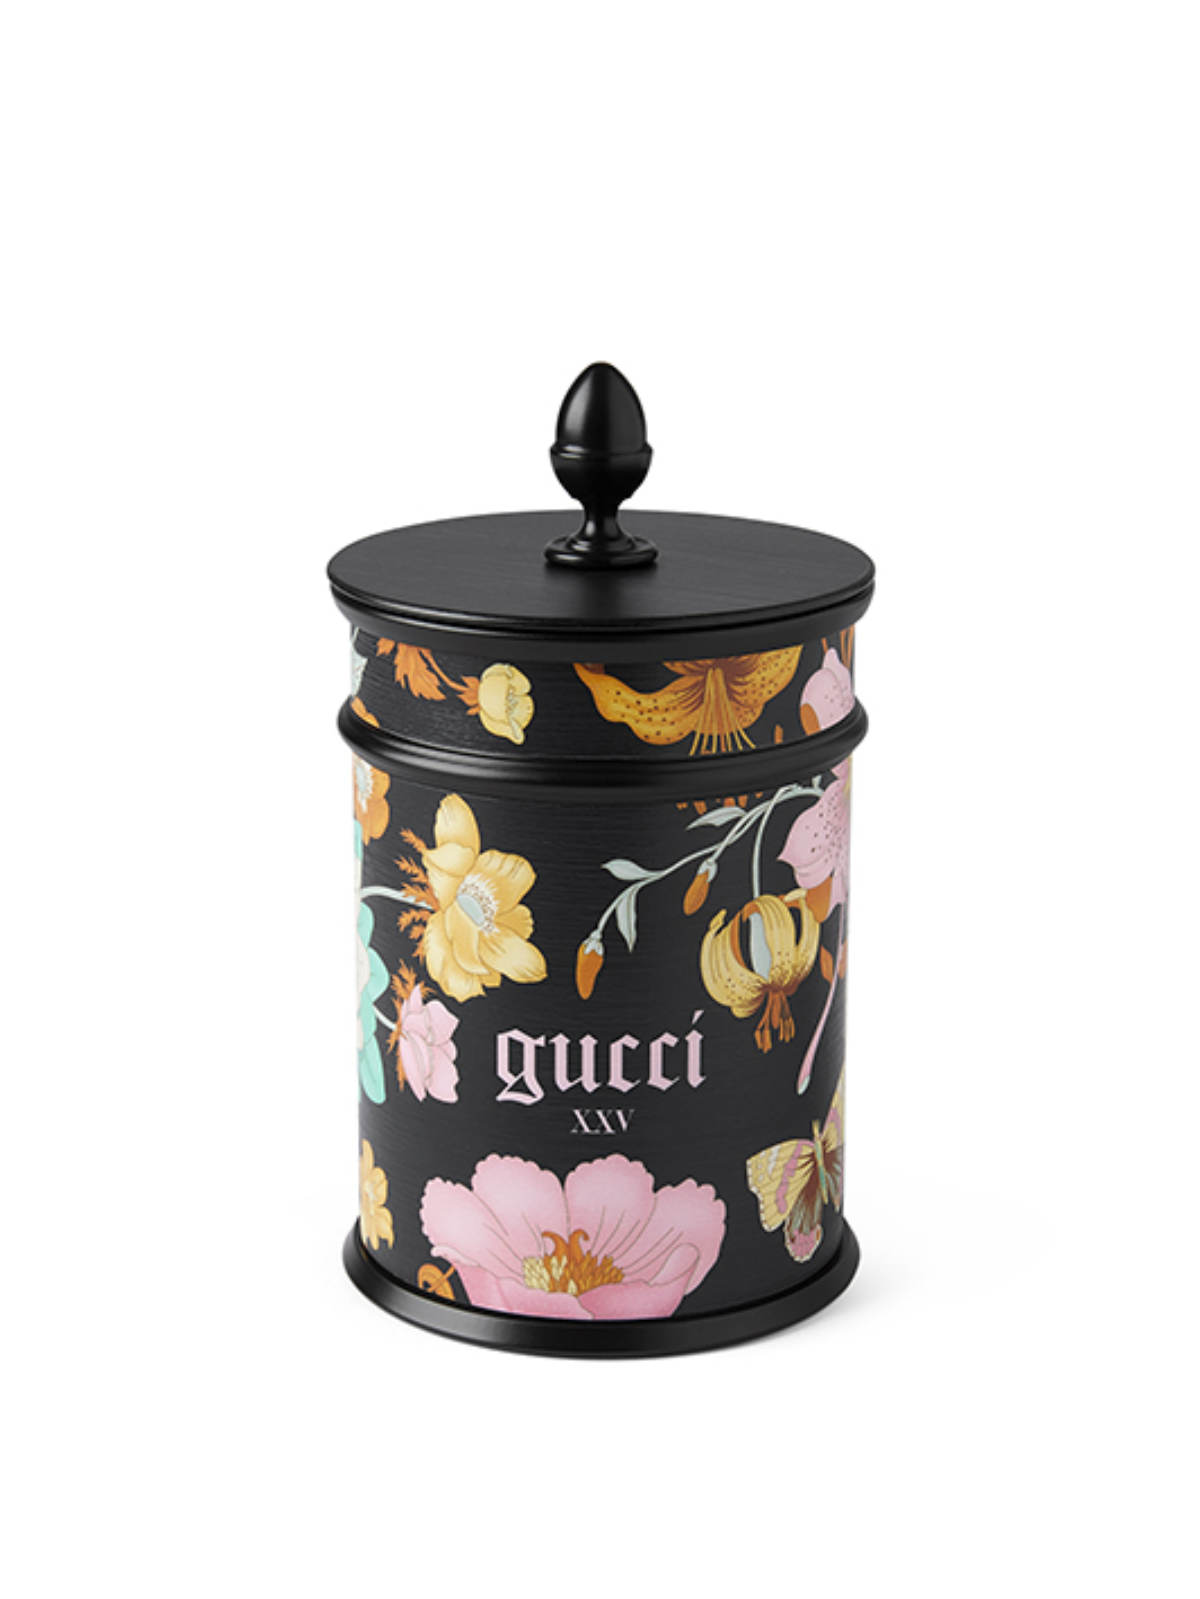 Gucci Introduces The New Décor Collection